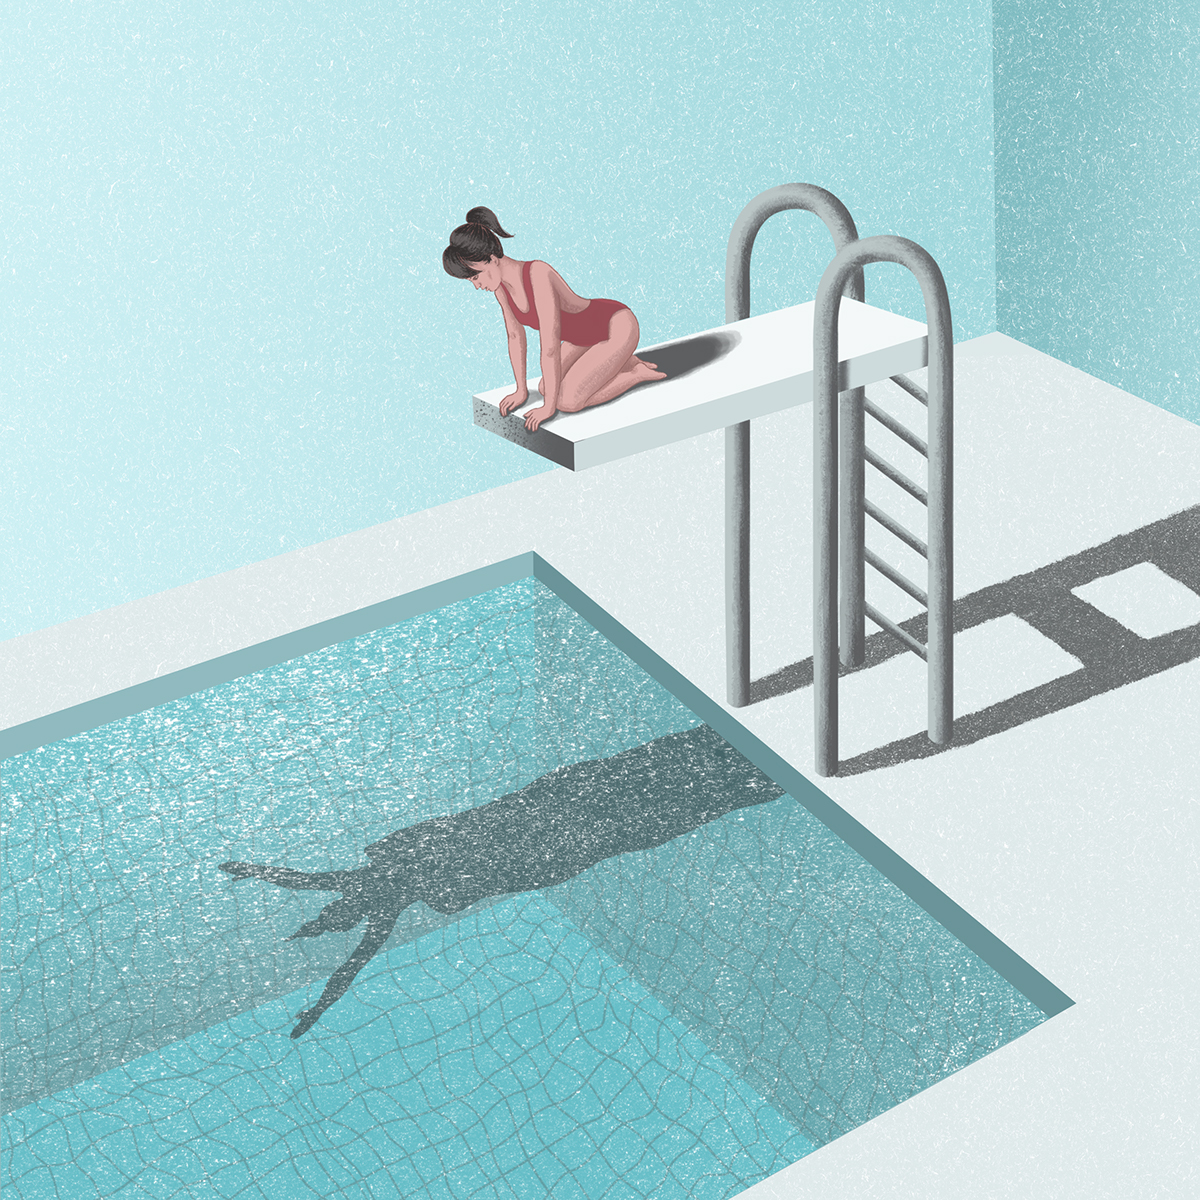 editorial ILLUSTRATION  swimming pool turqouise conflict texture woman fear reflection future